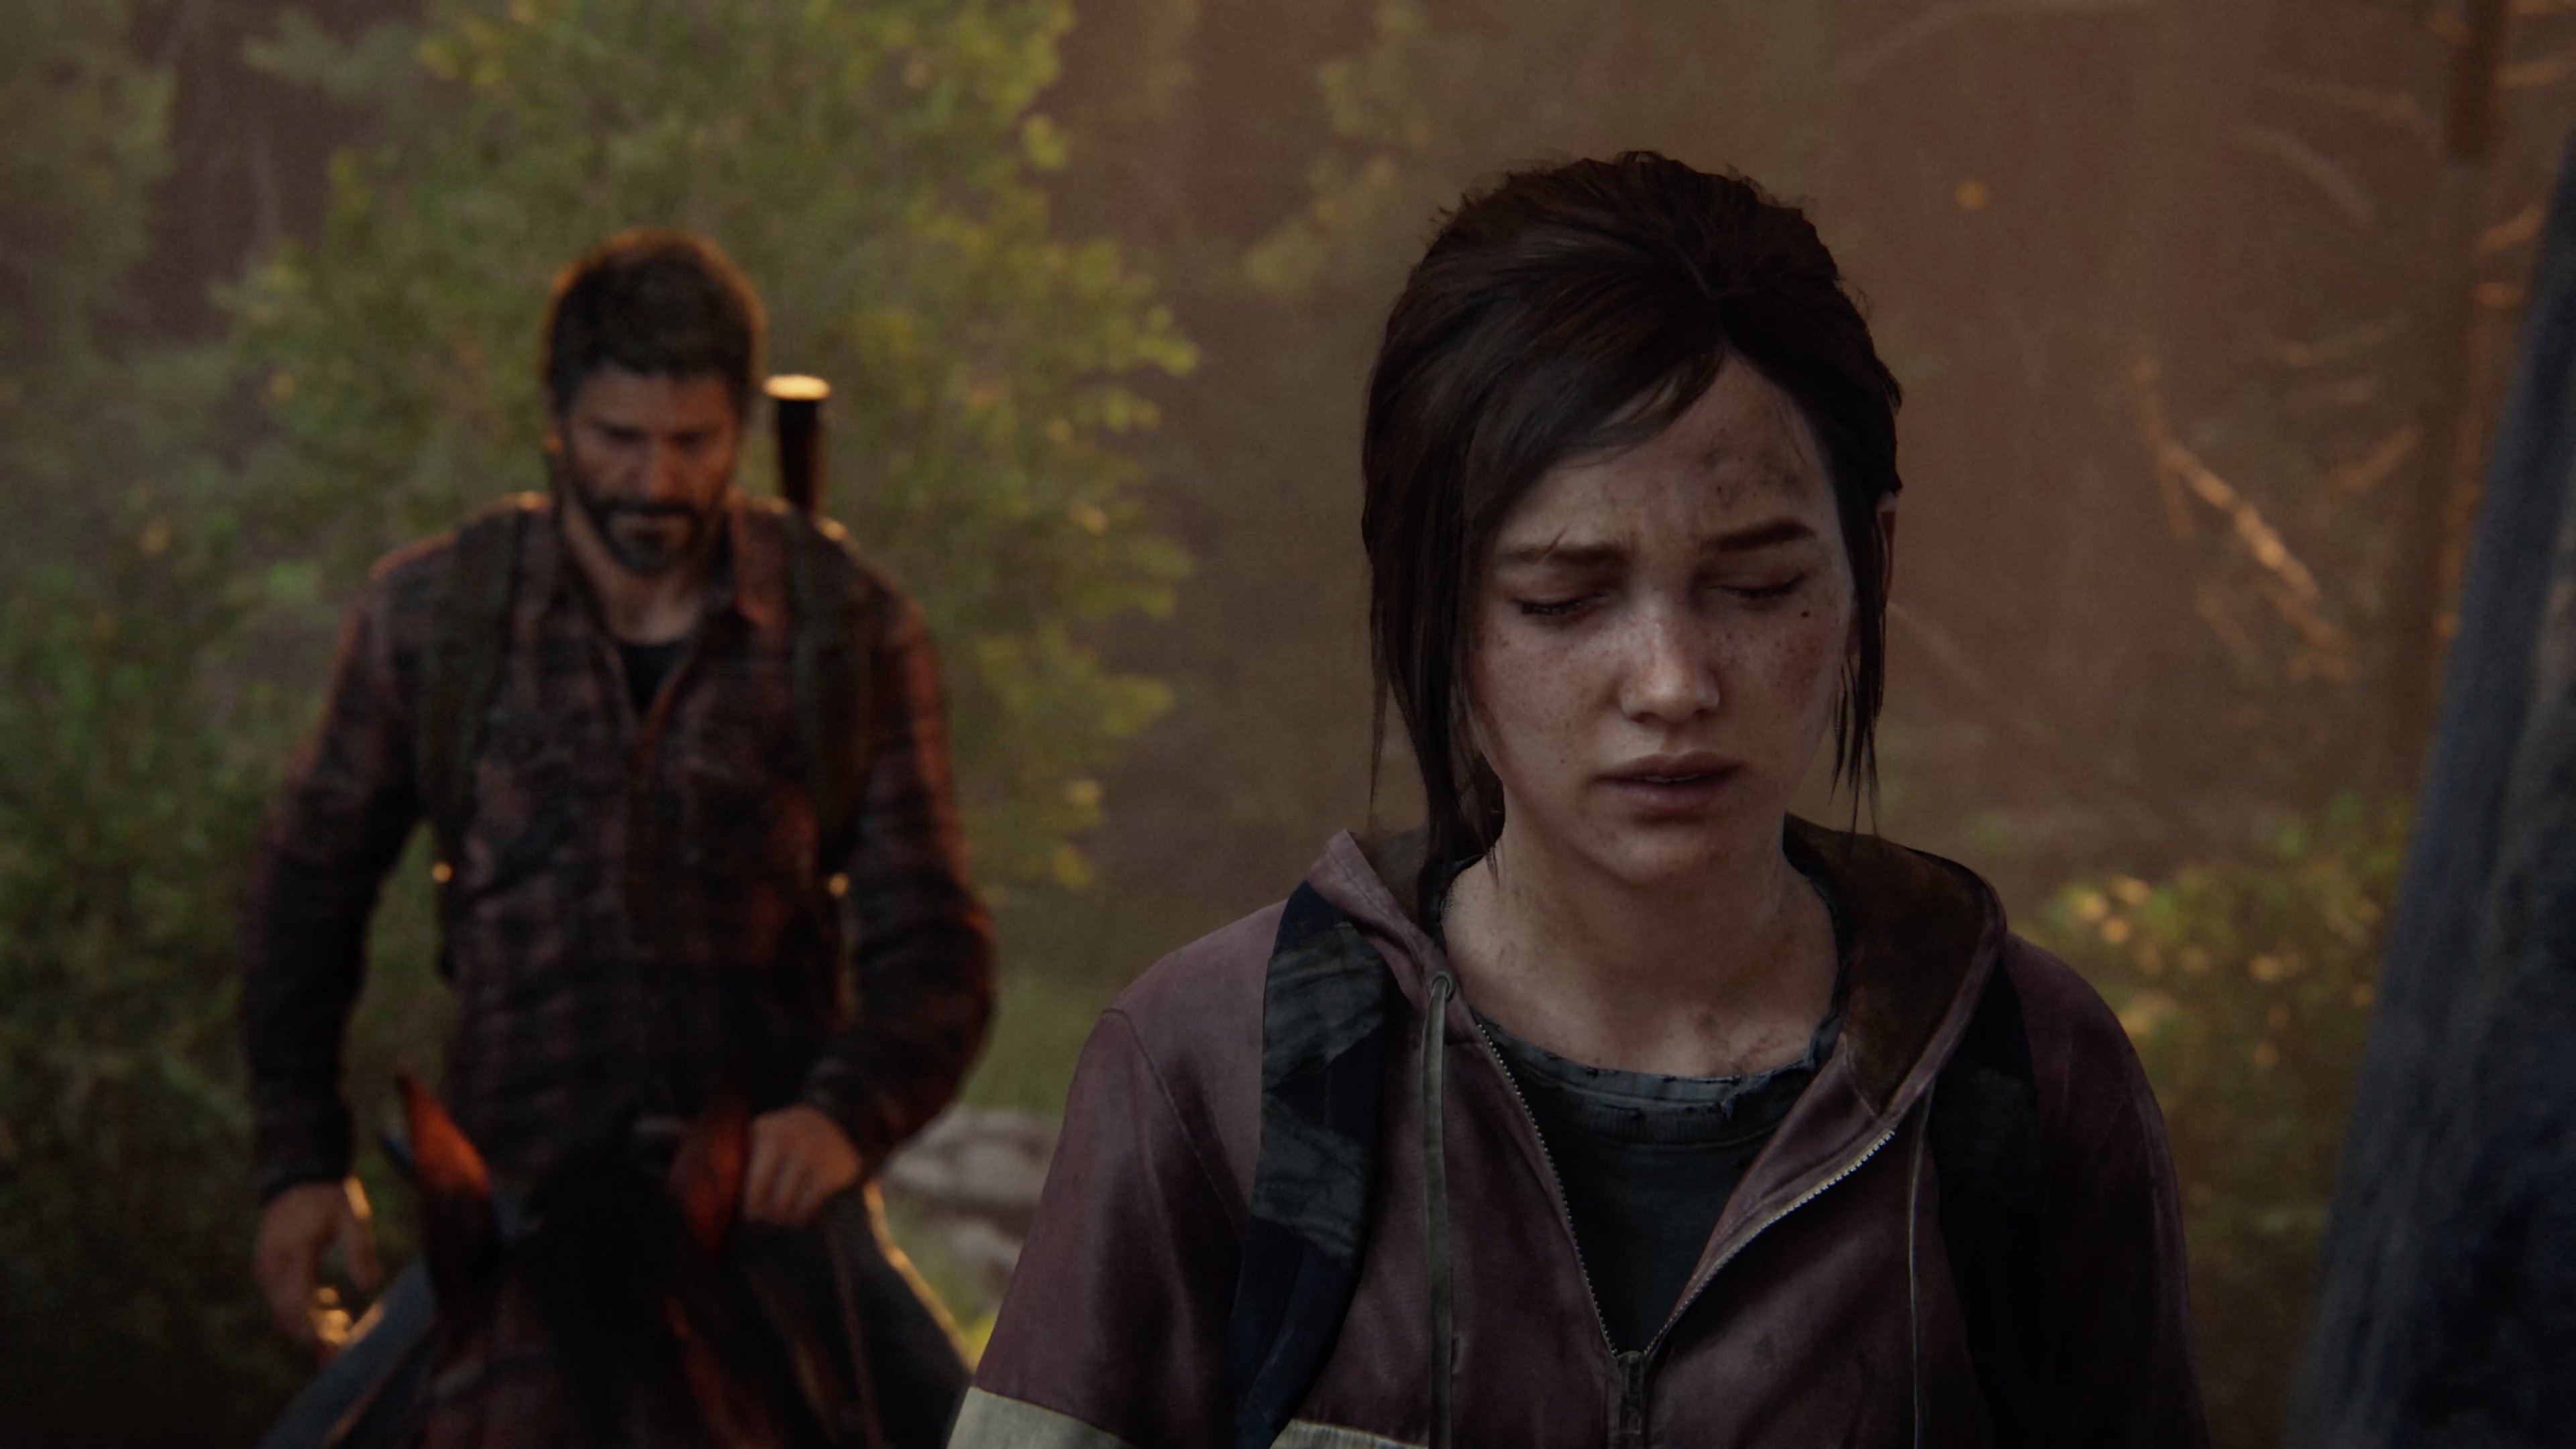 Last of us part 1 ps5. Элли the last of us 1 Remake. The last of us ремейк. The last of us Part i (2022 г.).